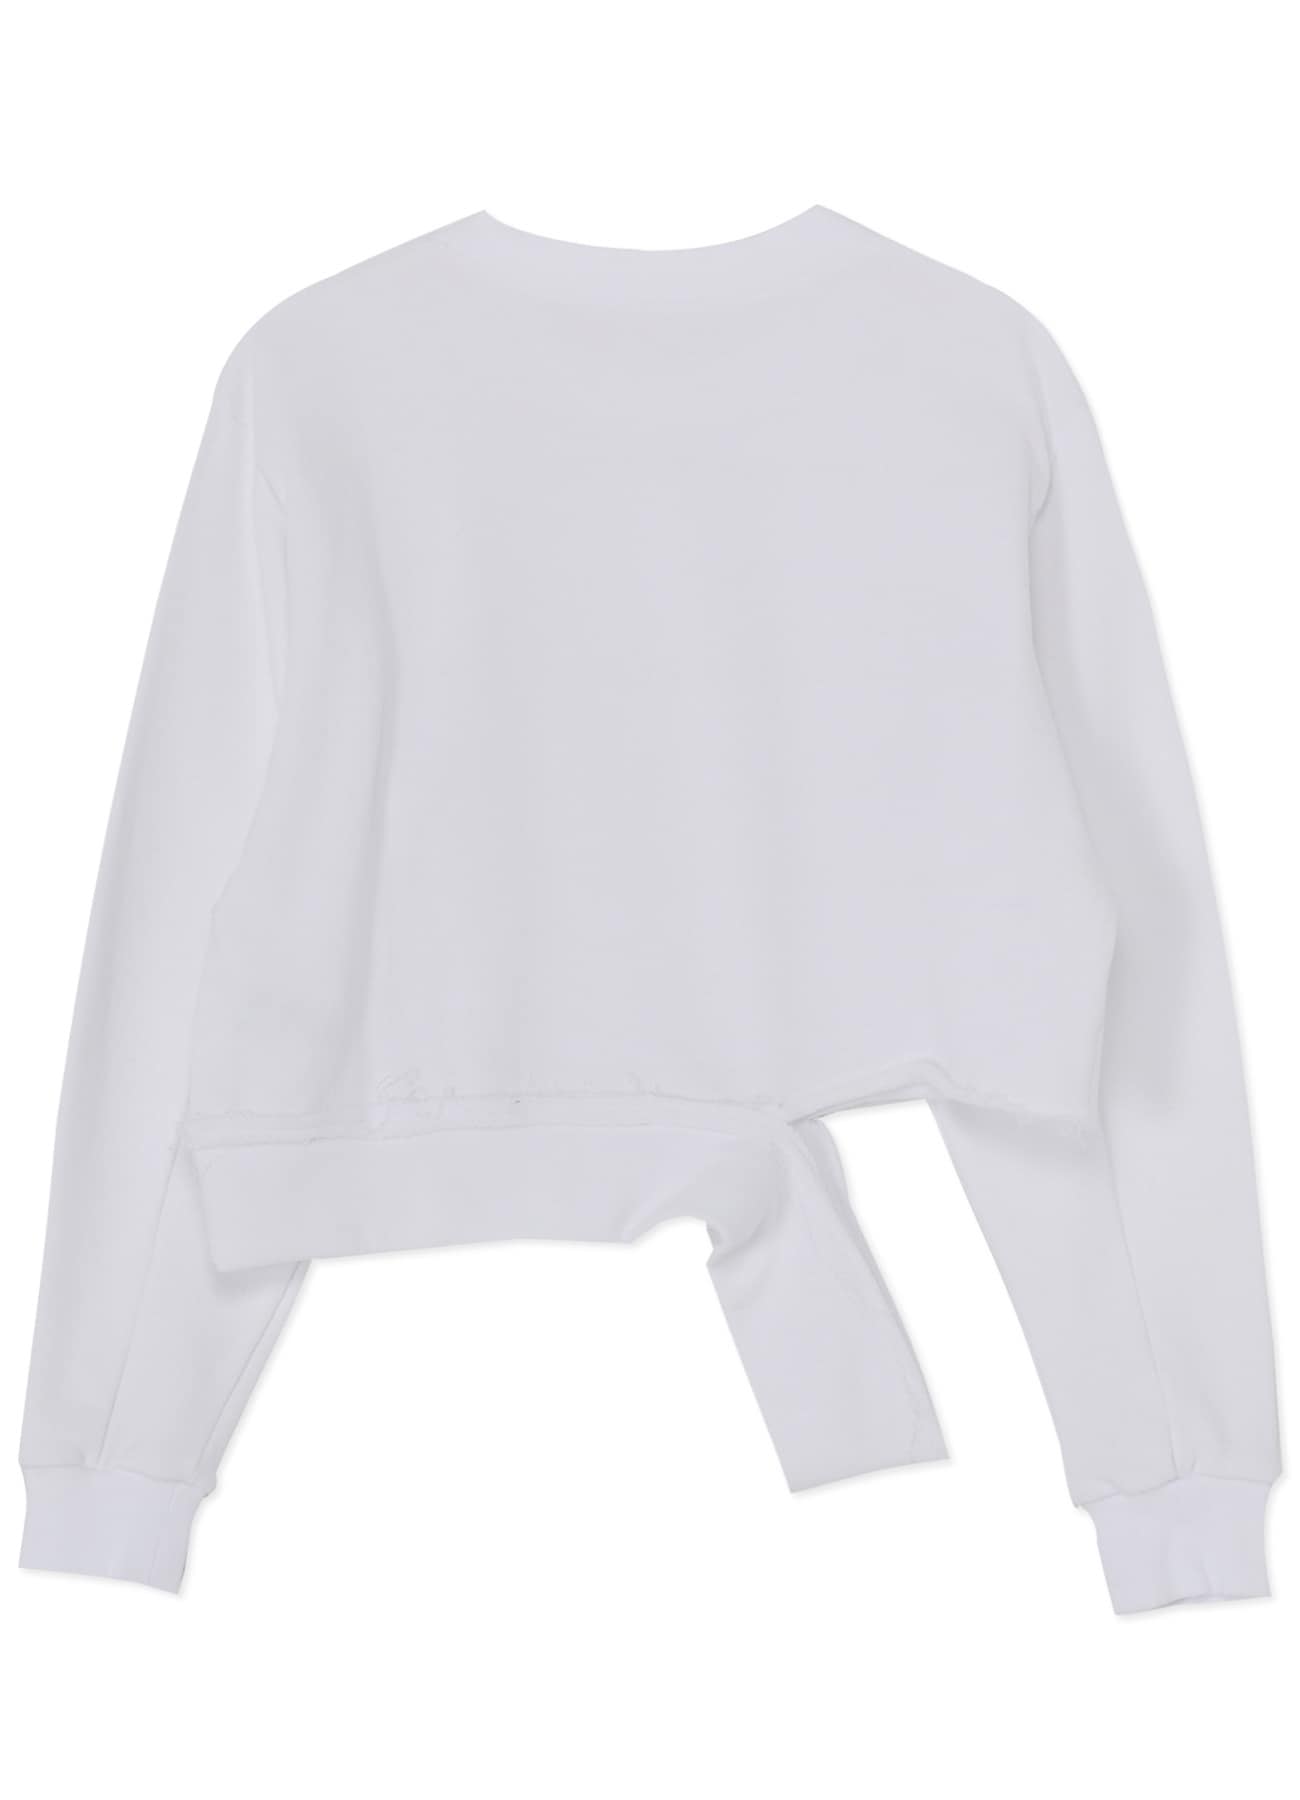 SOFT FRENCH TERRY CROPPED SWEATSHIRT